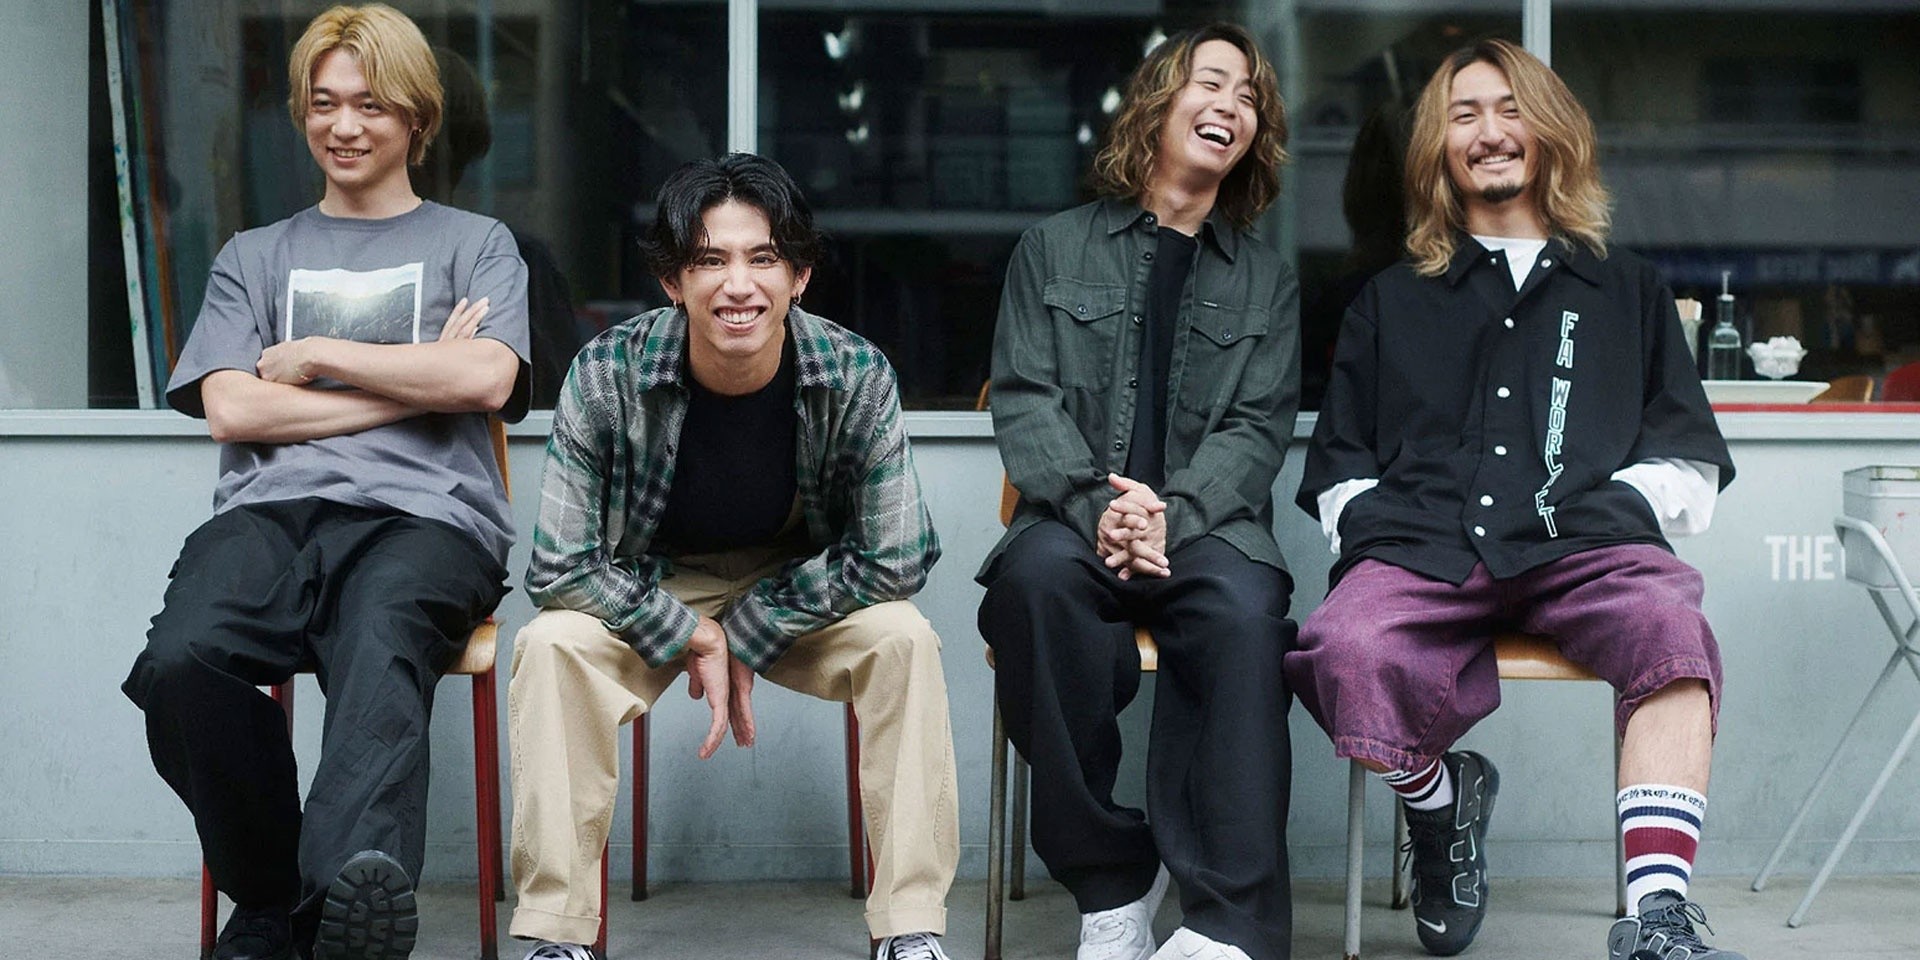 ONE OK ROCK announce new single 'Save Yourself', Fall 2022 North